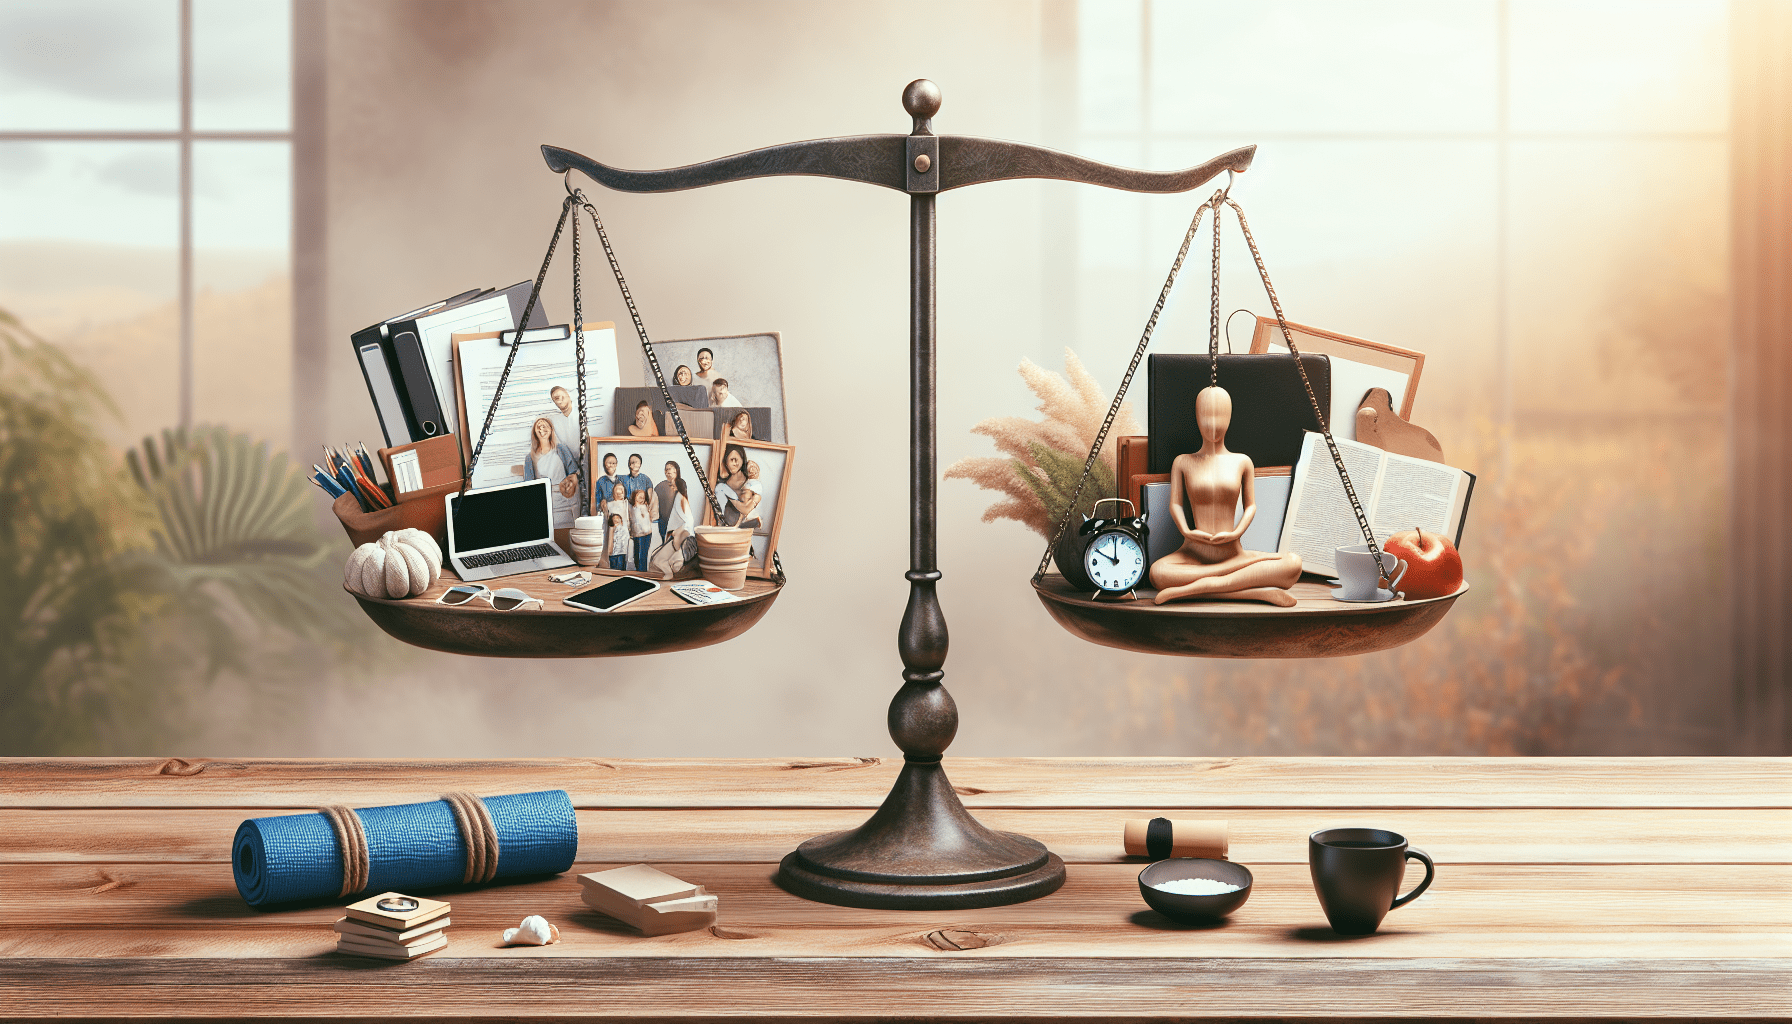 A symbolic scale balancing two pans with contrasting themes: one pan holds items and images representing family and technology, while the other contains objects and images related to personal development and relaxation. The scene is set against a warm, sunlit background with a window overlooking a blurred landscape.